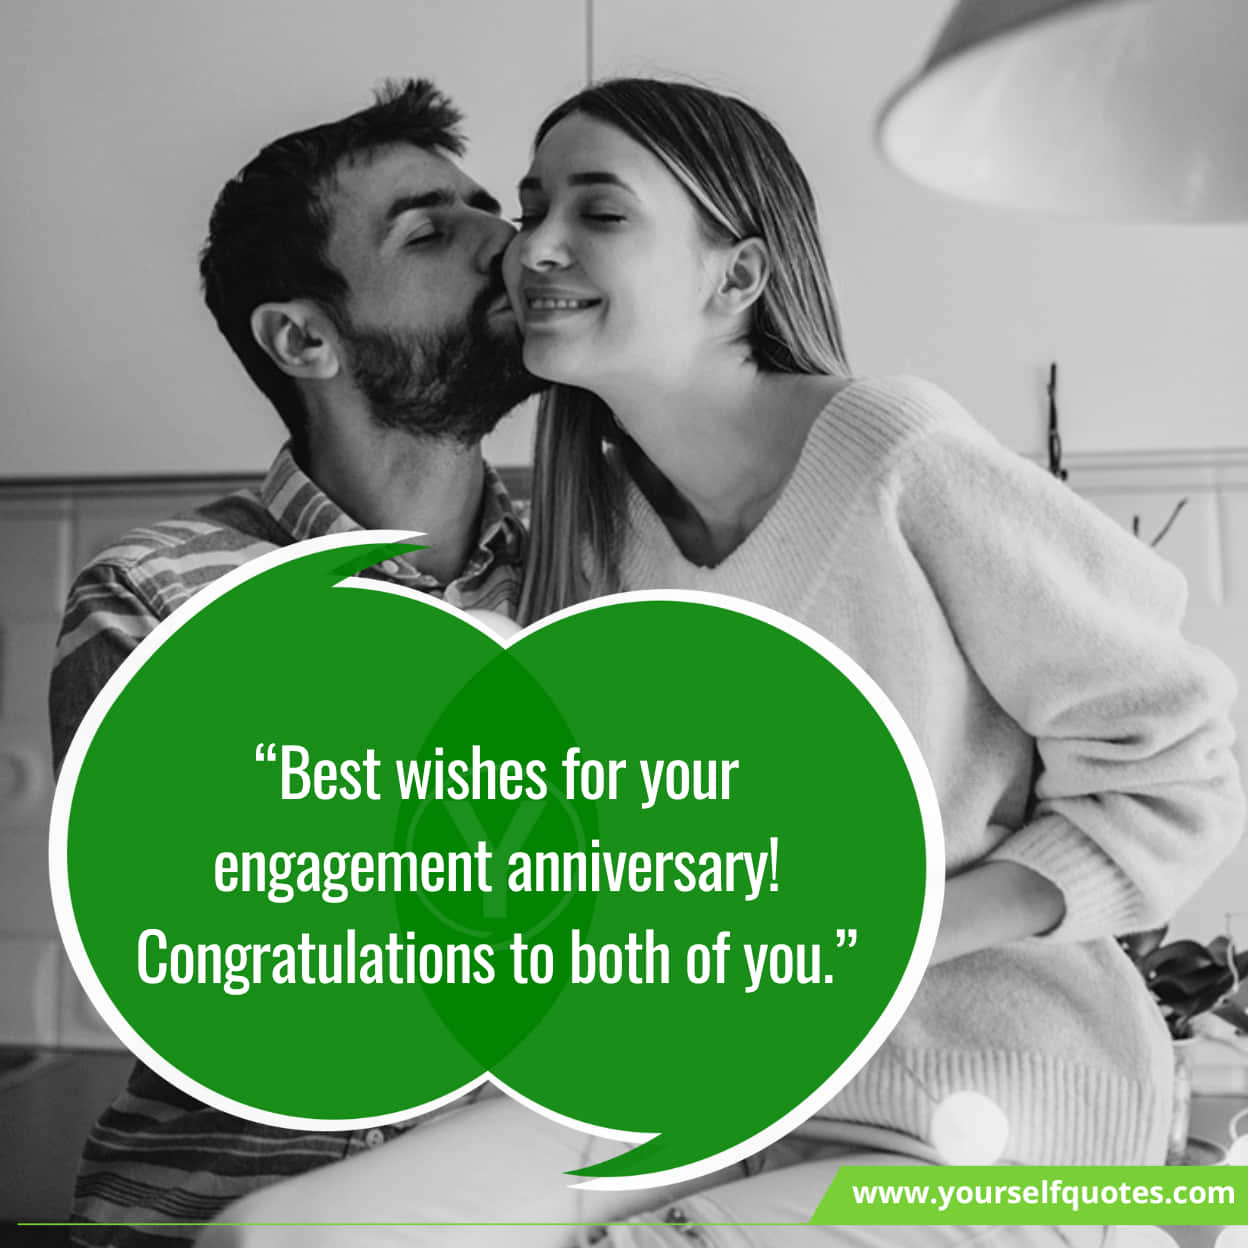 Happy Engagement Anniversary Wishes, Quotes, Messages